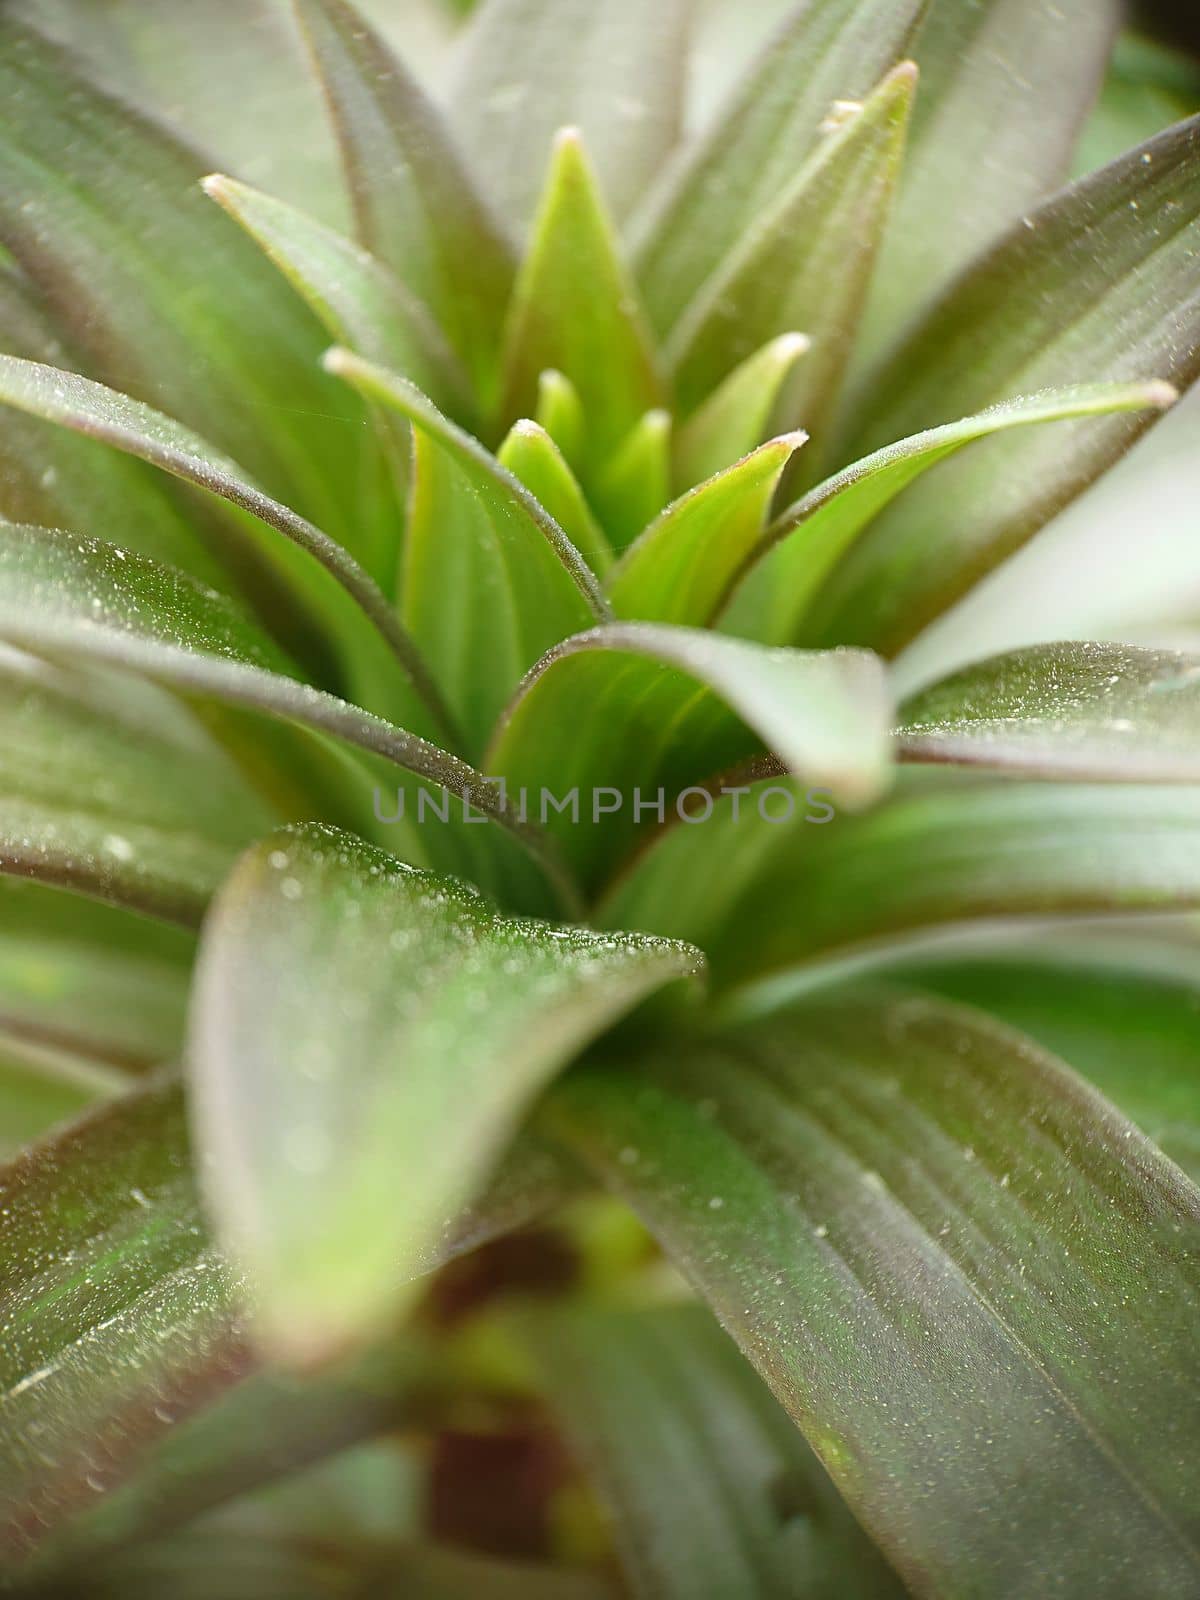 Background texture of green foliage of a lily without a flower outdoors.Macrophotography.